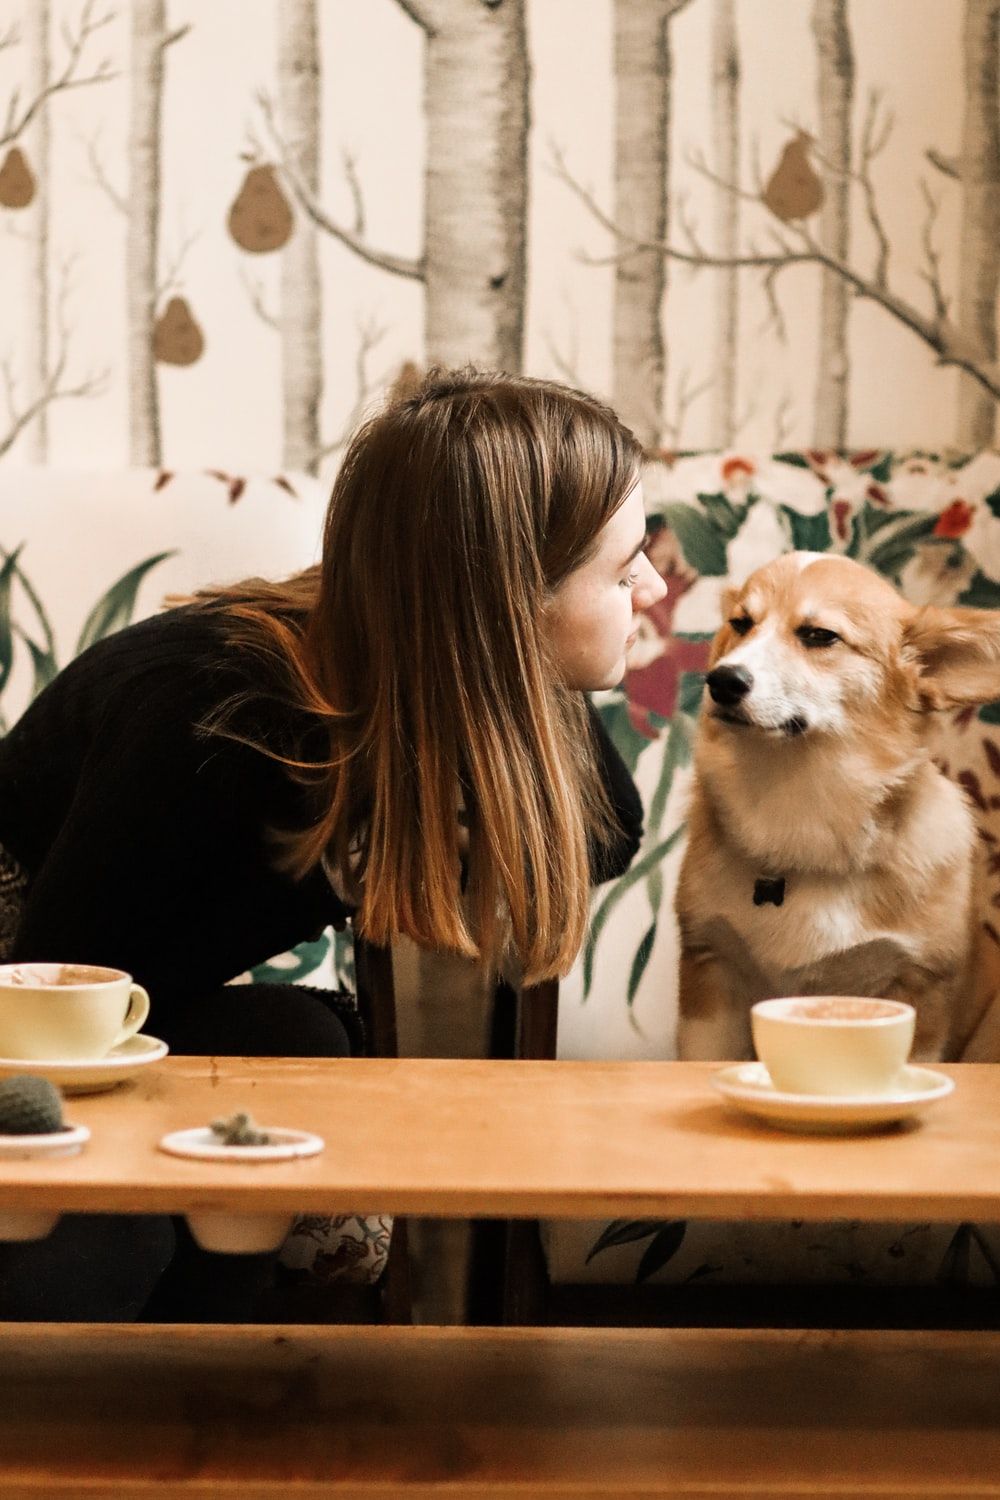 Dog Coffee Picture. Download Free Image